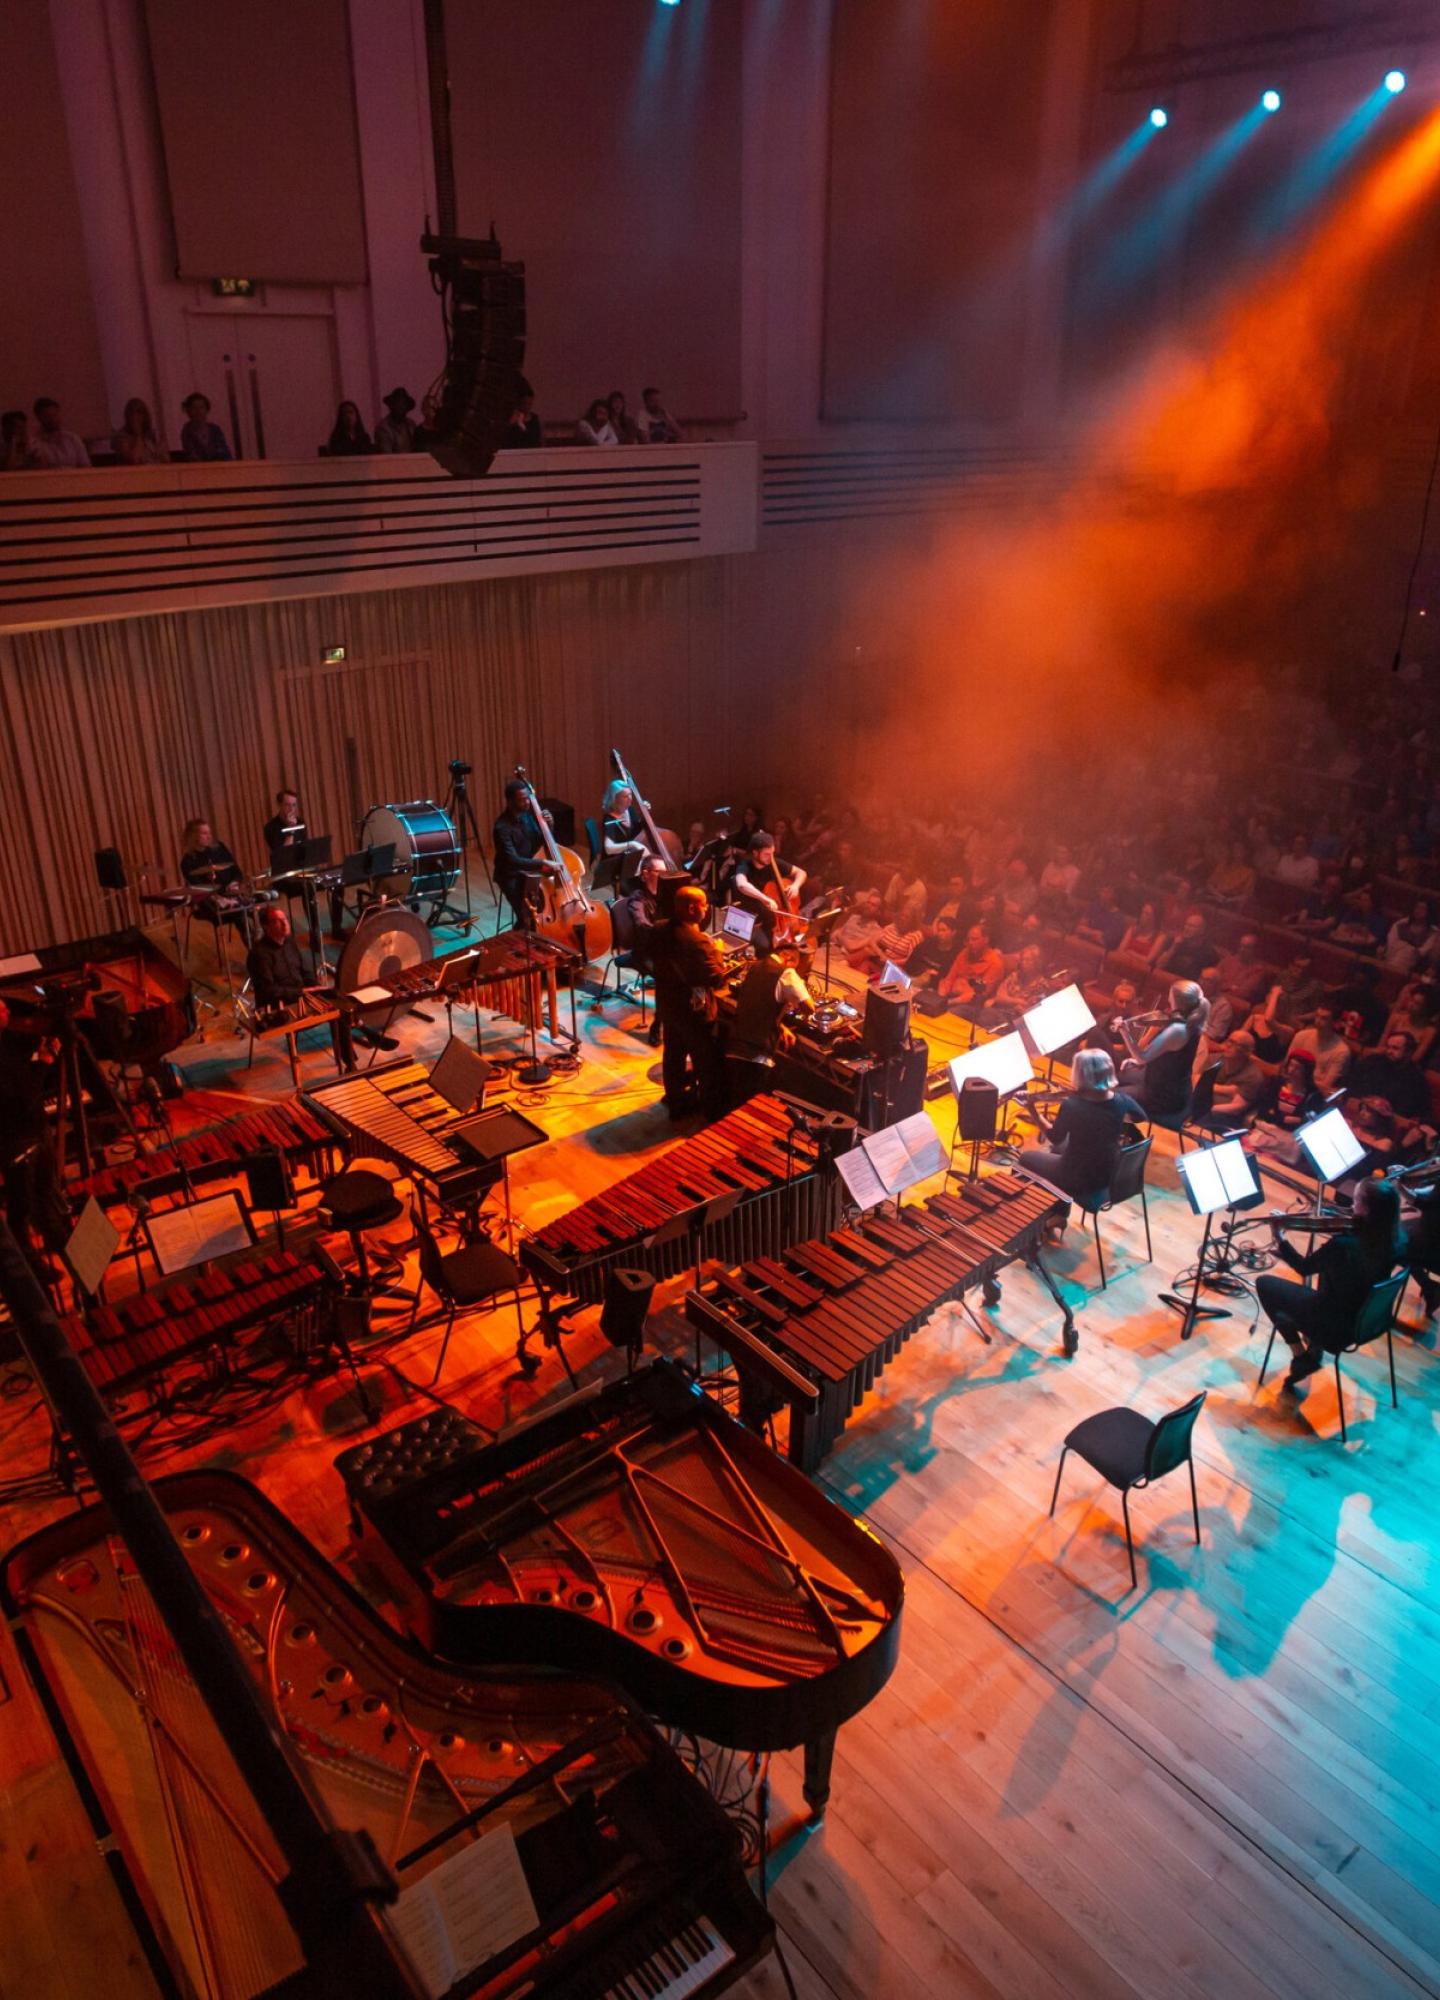 An orchestra on stage performing to an audience